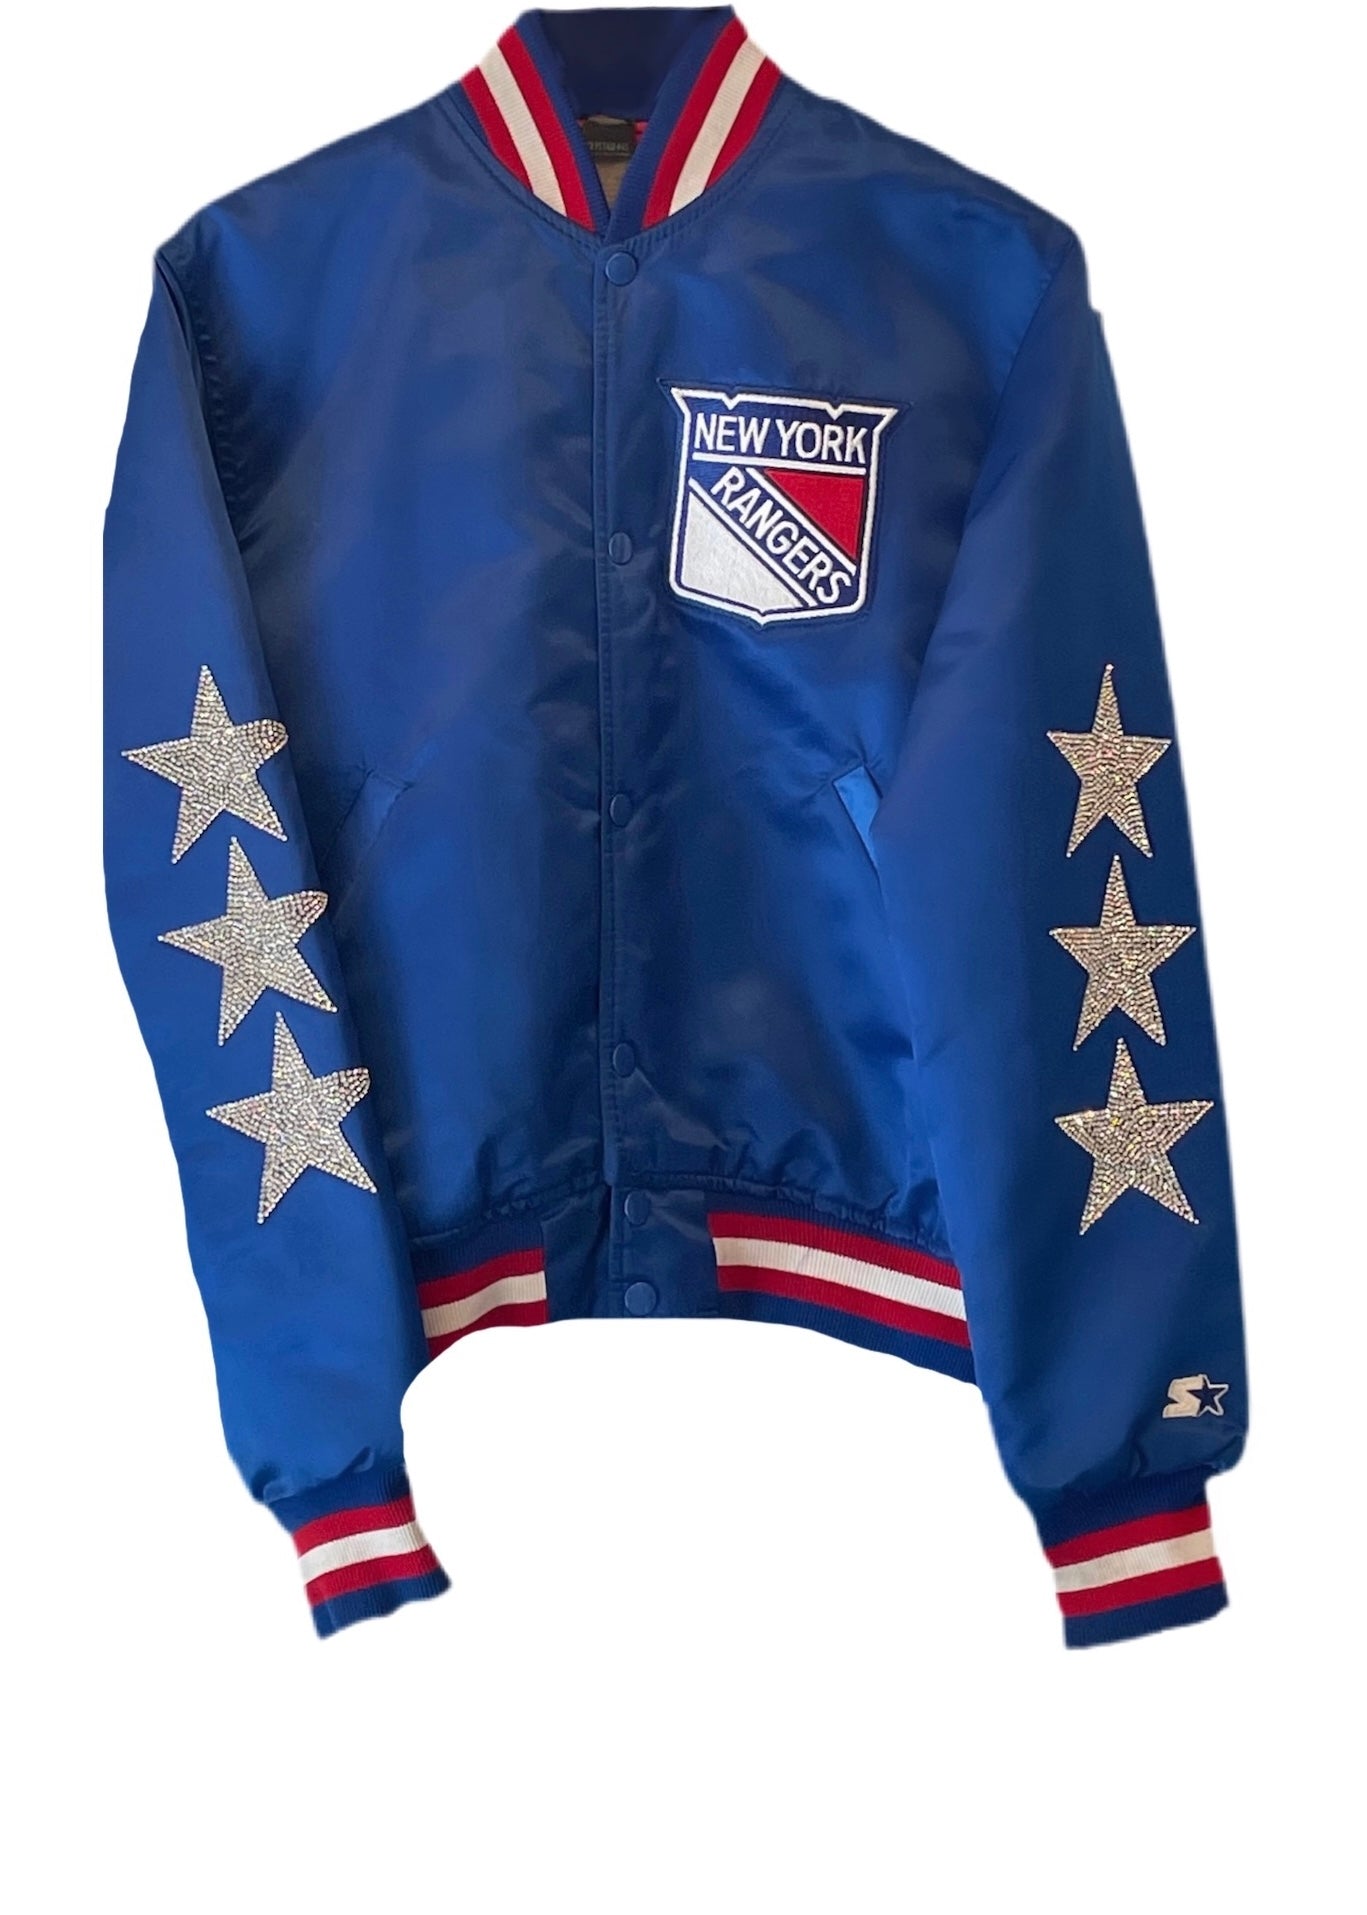 NY Rangers Legends Red and Blue Satin Jacket - Paragon Jackets